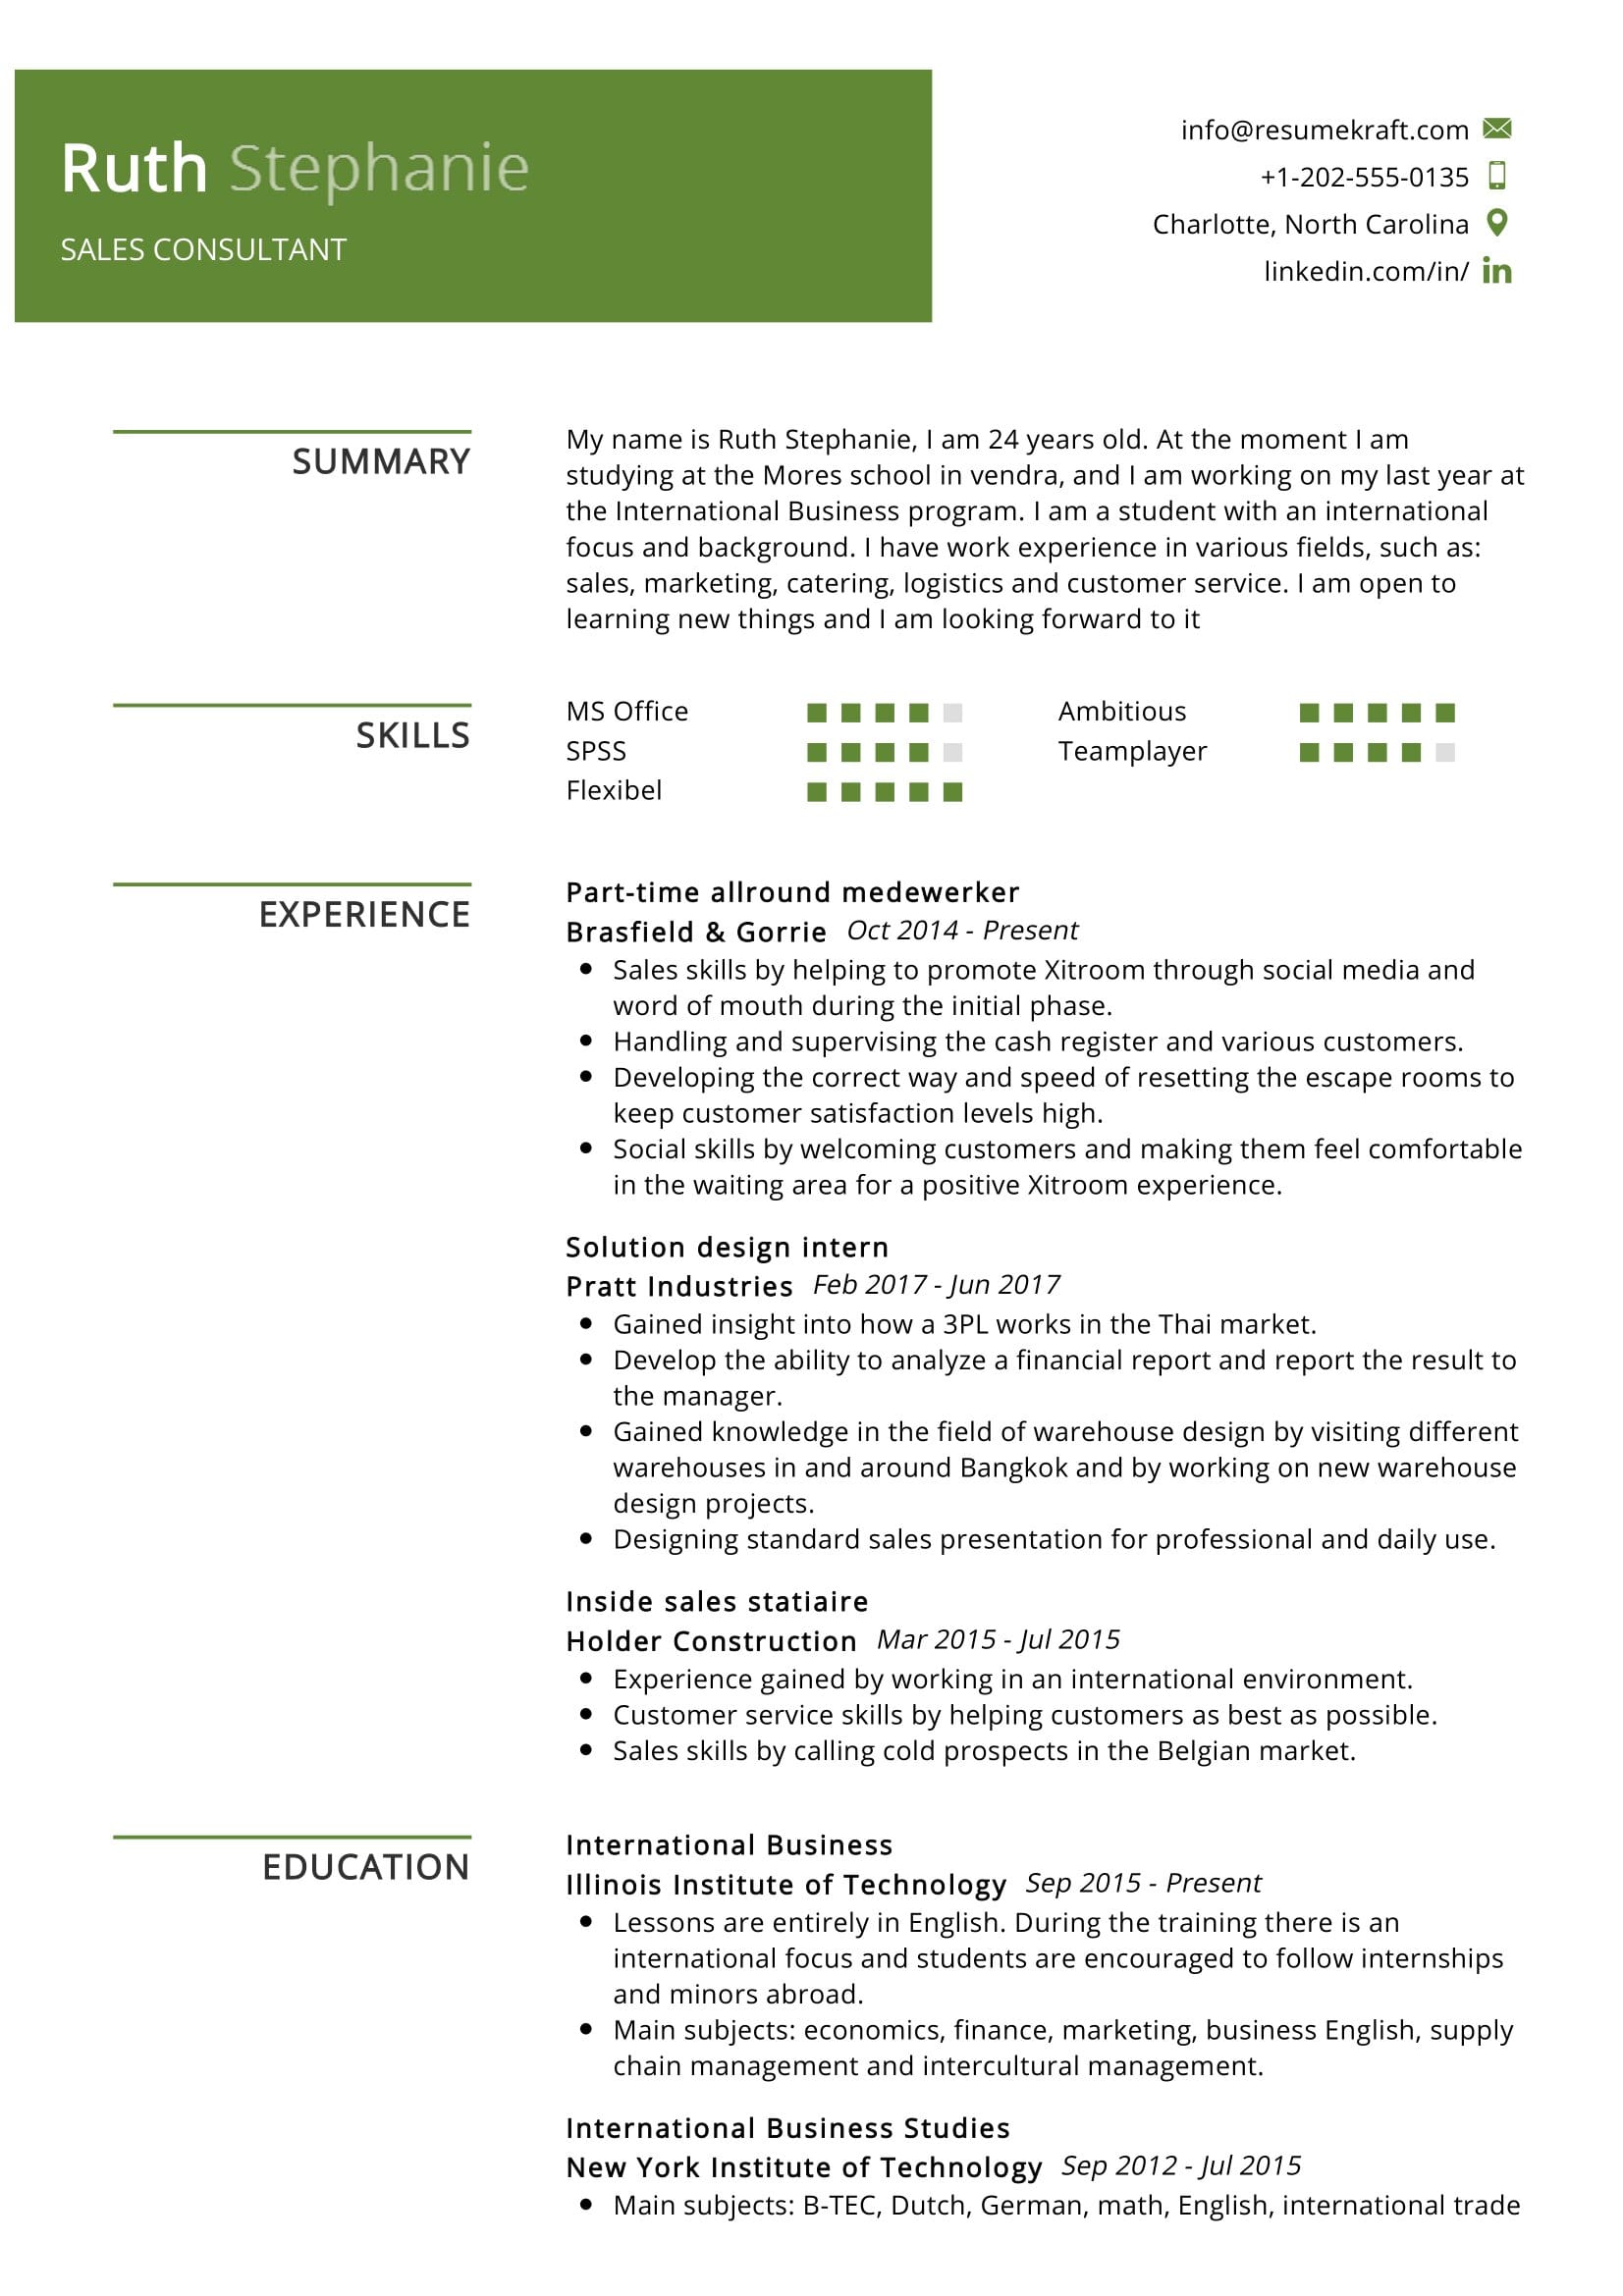 how to write a sales professional resume